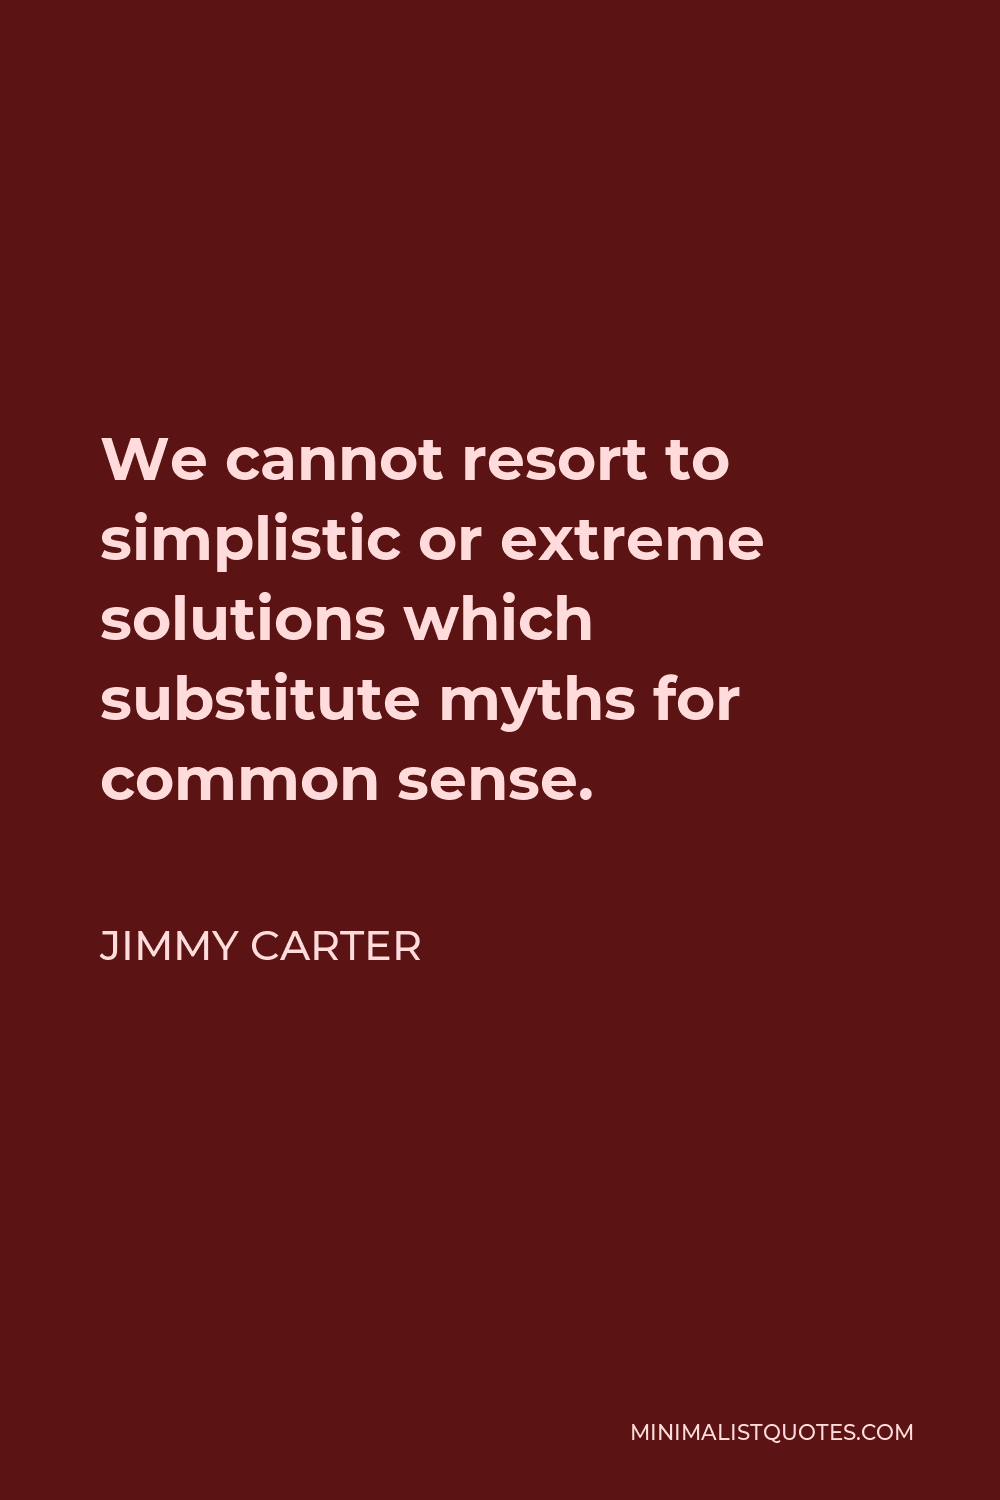 Jimmy Carter Quote - We cannot resort to simplistic or extreme solutions which substitute myths for common sense.